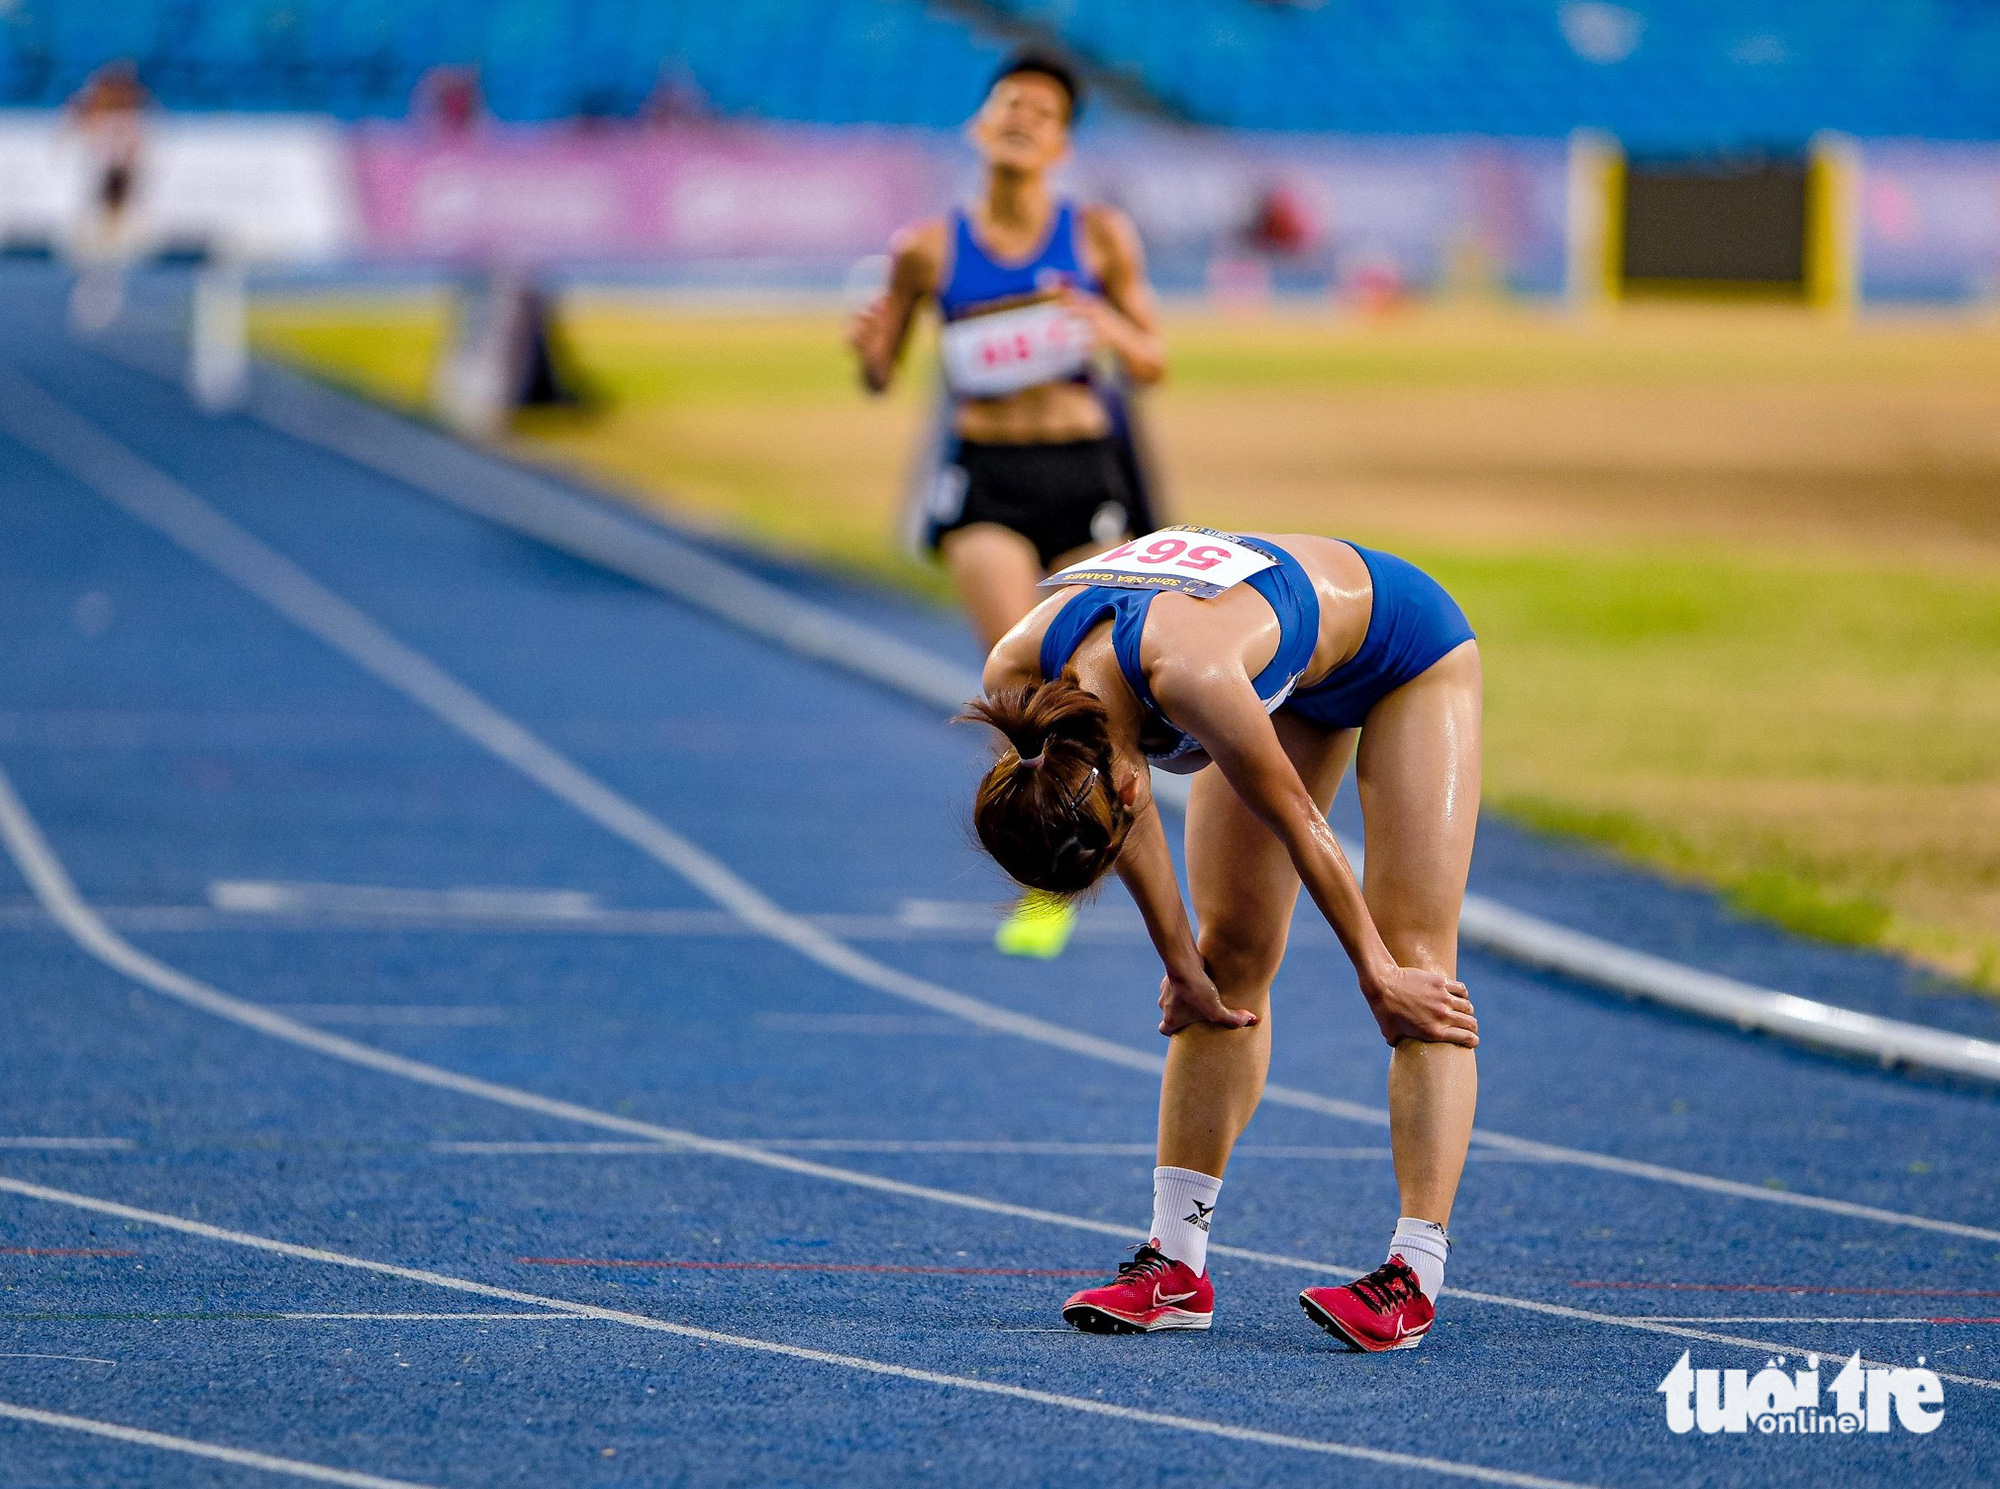 Vietnamese runner Nguyen Thi Oanh celebrating her victory after finishing first in the women's 3,000-meter hurdles at the 2023 Southeast Asian Games in Cambodia, May 9, 2023